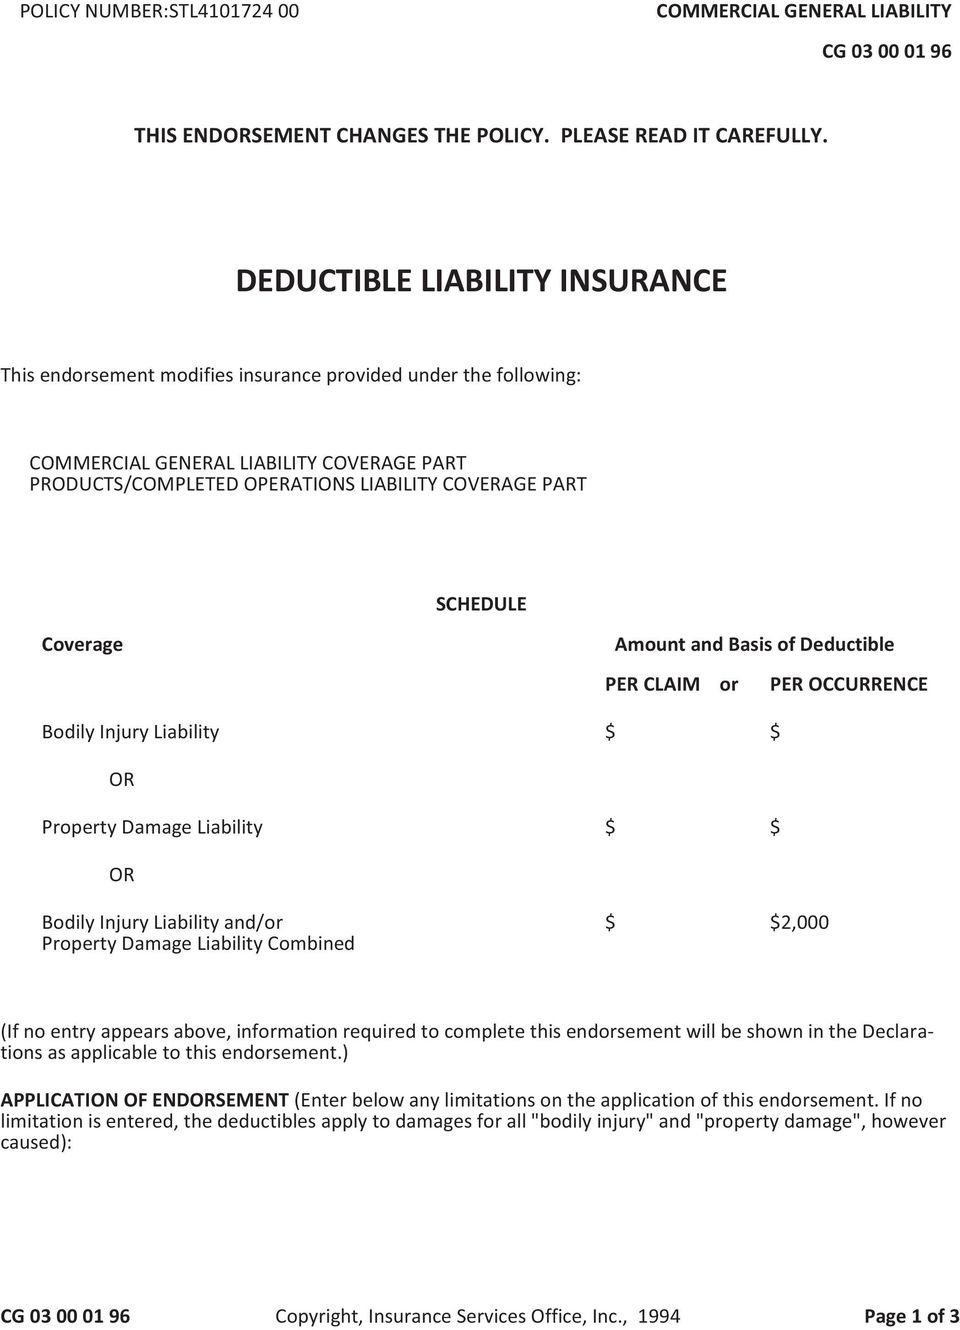 SCHEDULE Coverage Amount and Basis of Deductible PER CLAIM or PER OCCURRENCE Bodily Injury Liability $ $ OR Property Damage Liability $ $ OR Bodily Injury Liability and/or Property Damage Liability